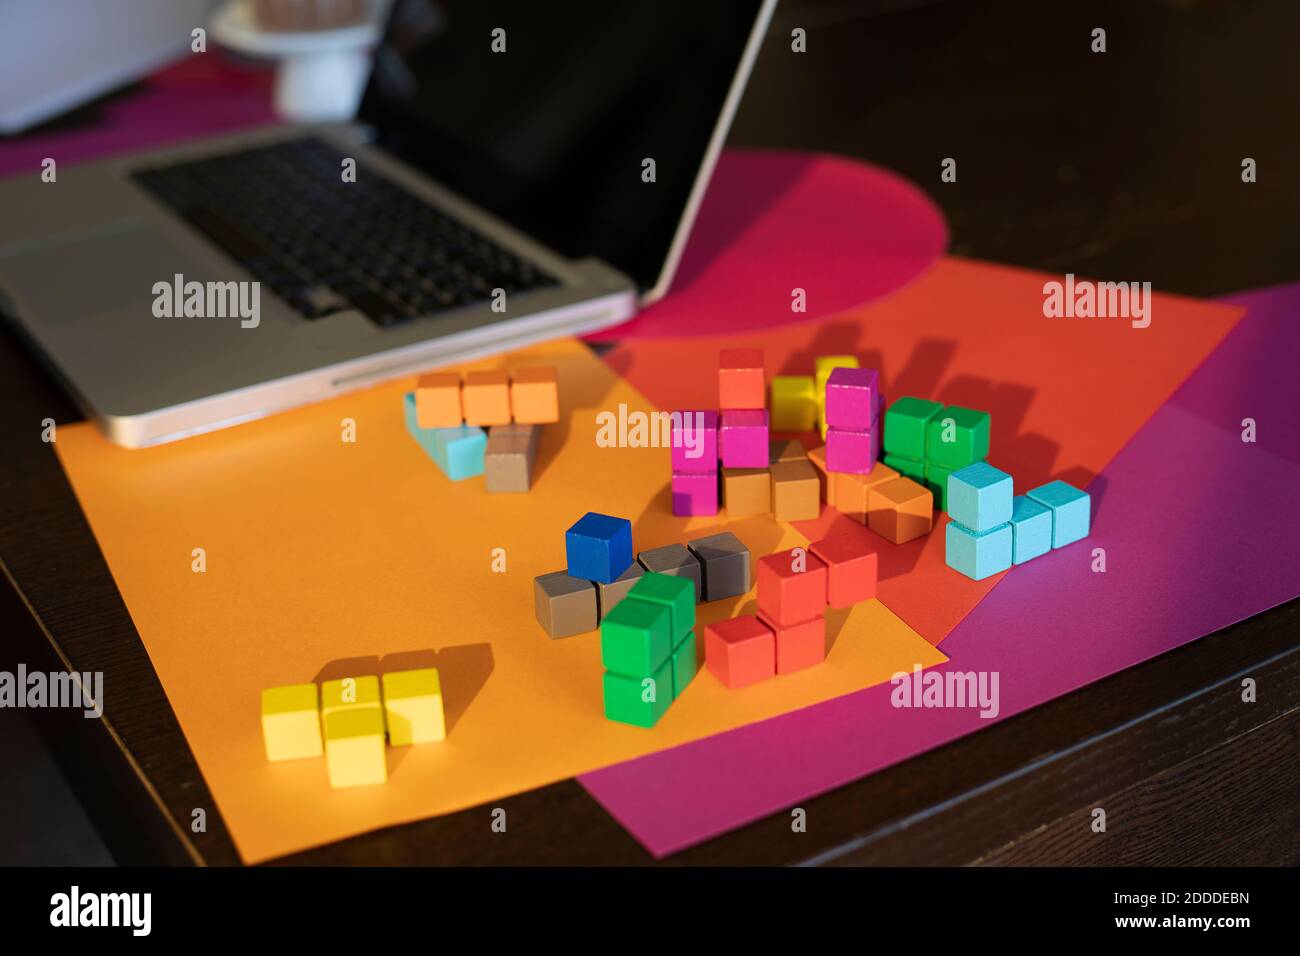 High angle view of multi colored paper, laptop and colorful blocks on table Stock Photo